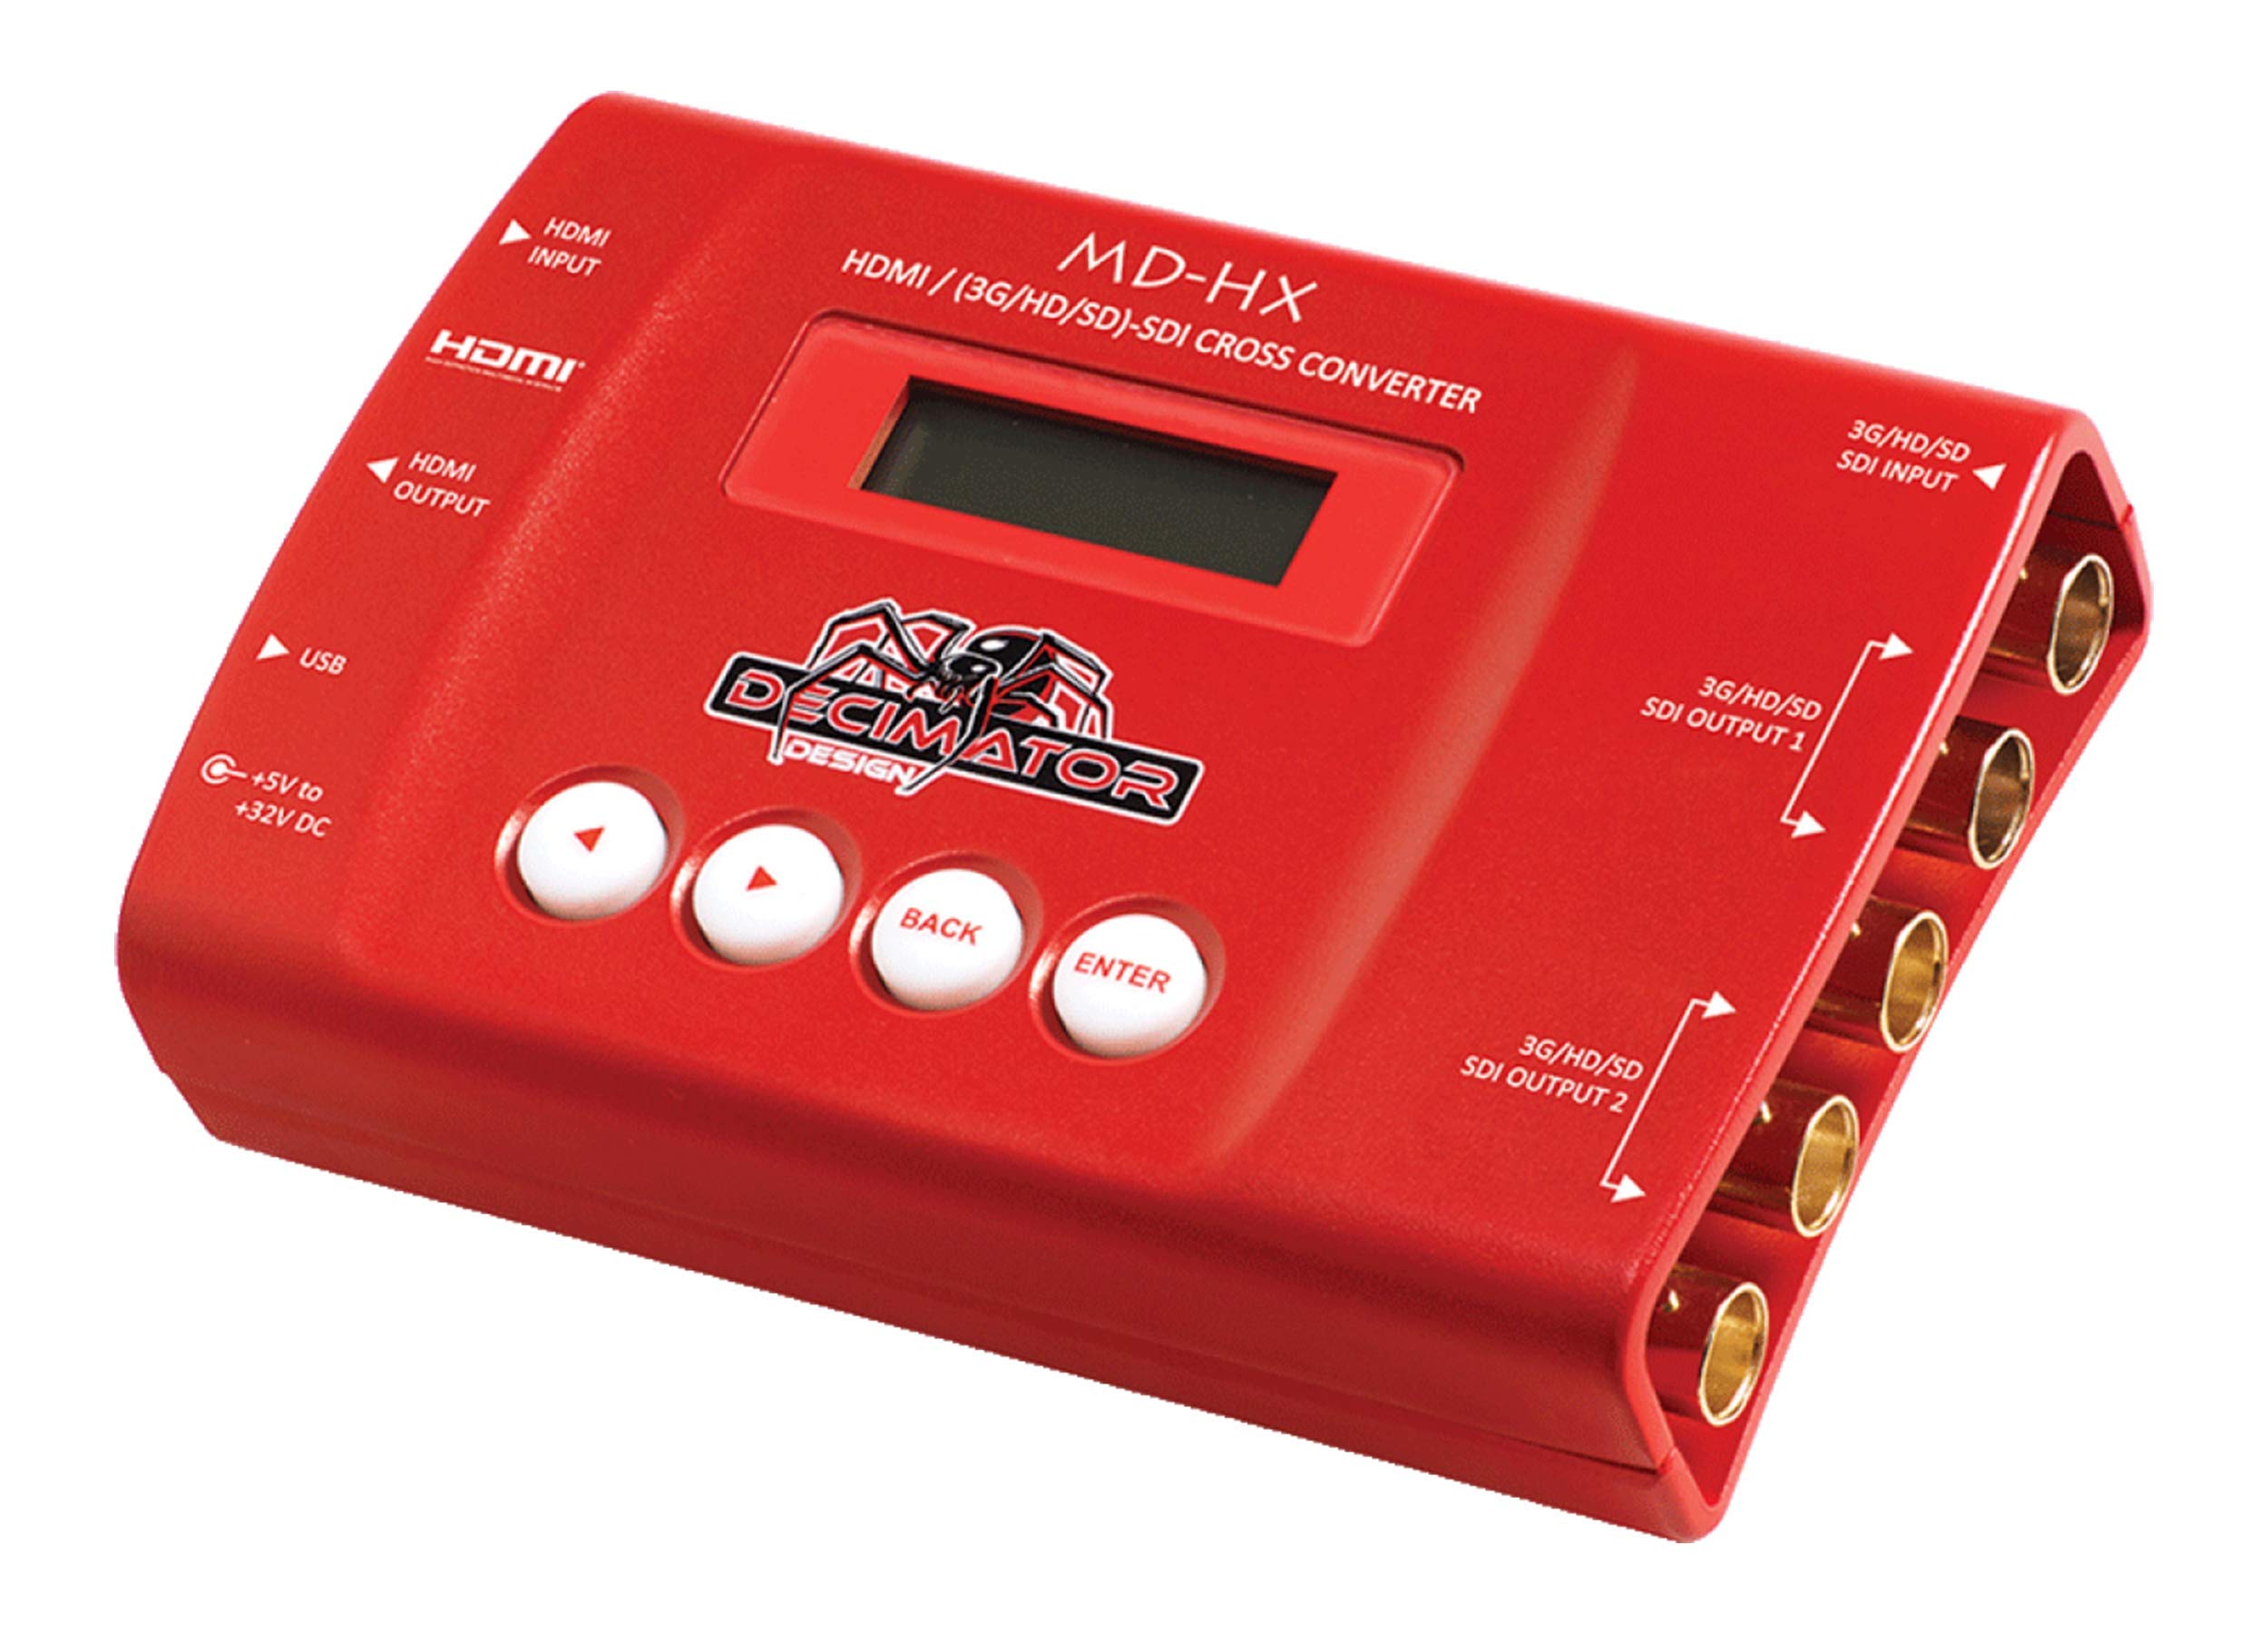 Decimator MD-HX HDMI and SDI Cross Converter with Scaling & Frame Rate Conversion